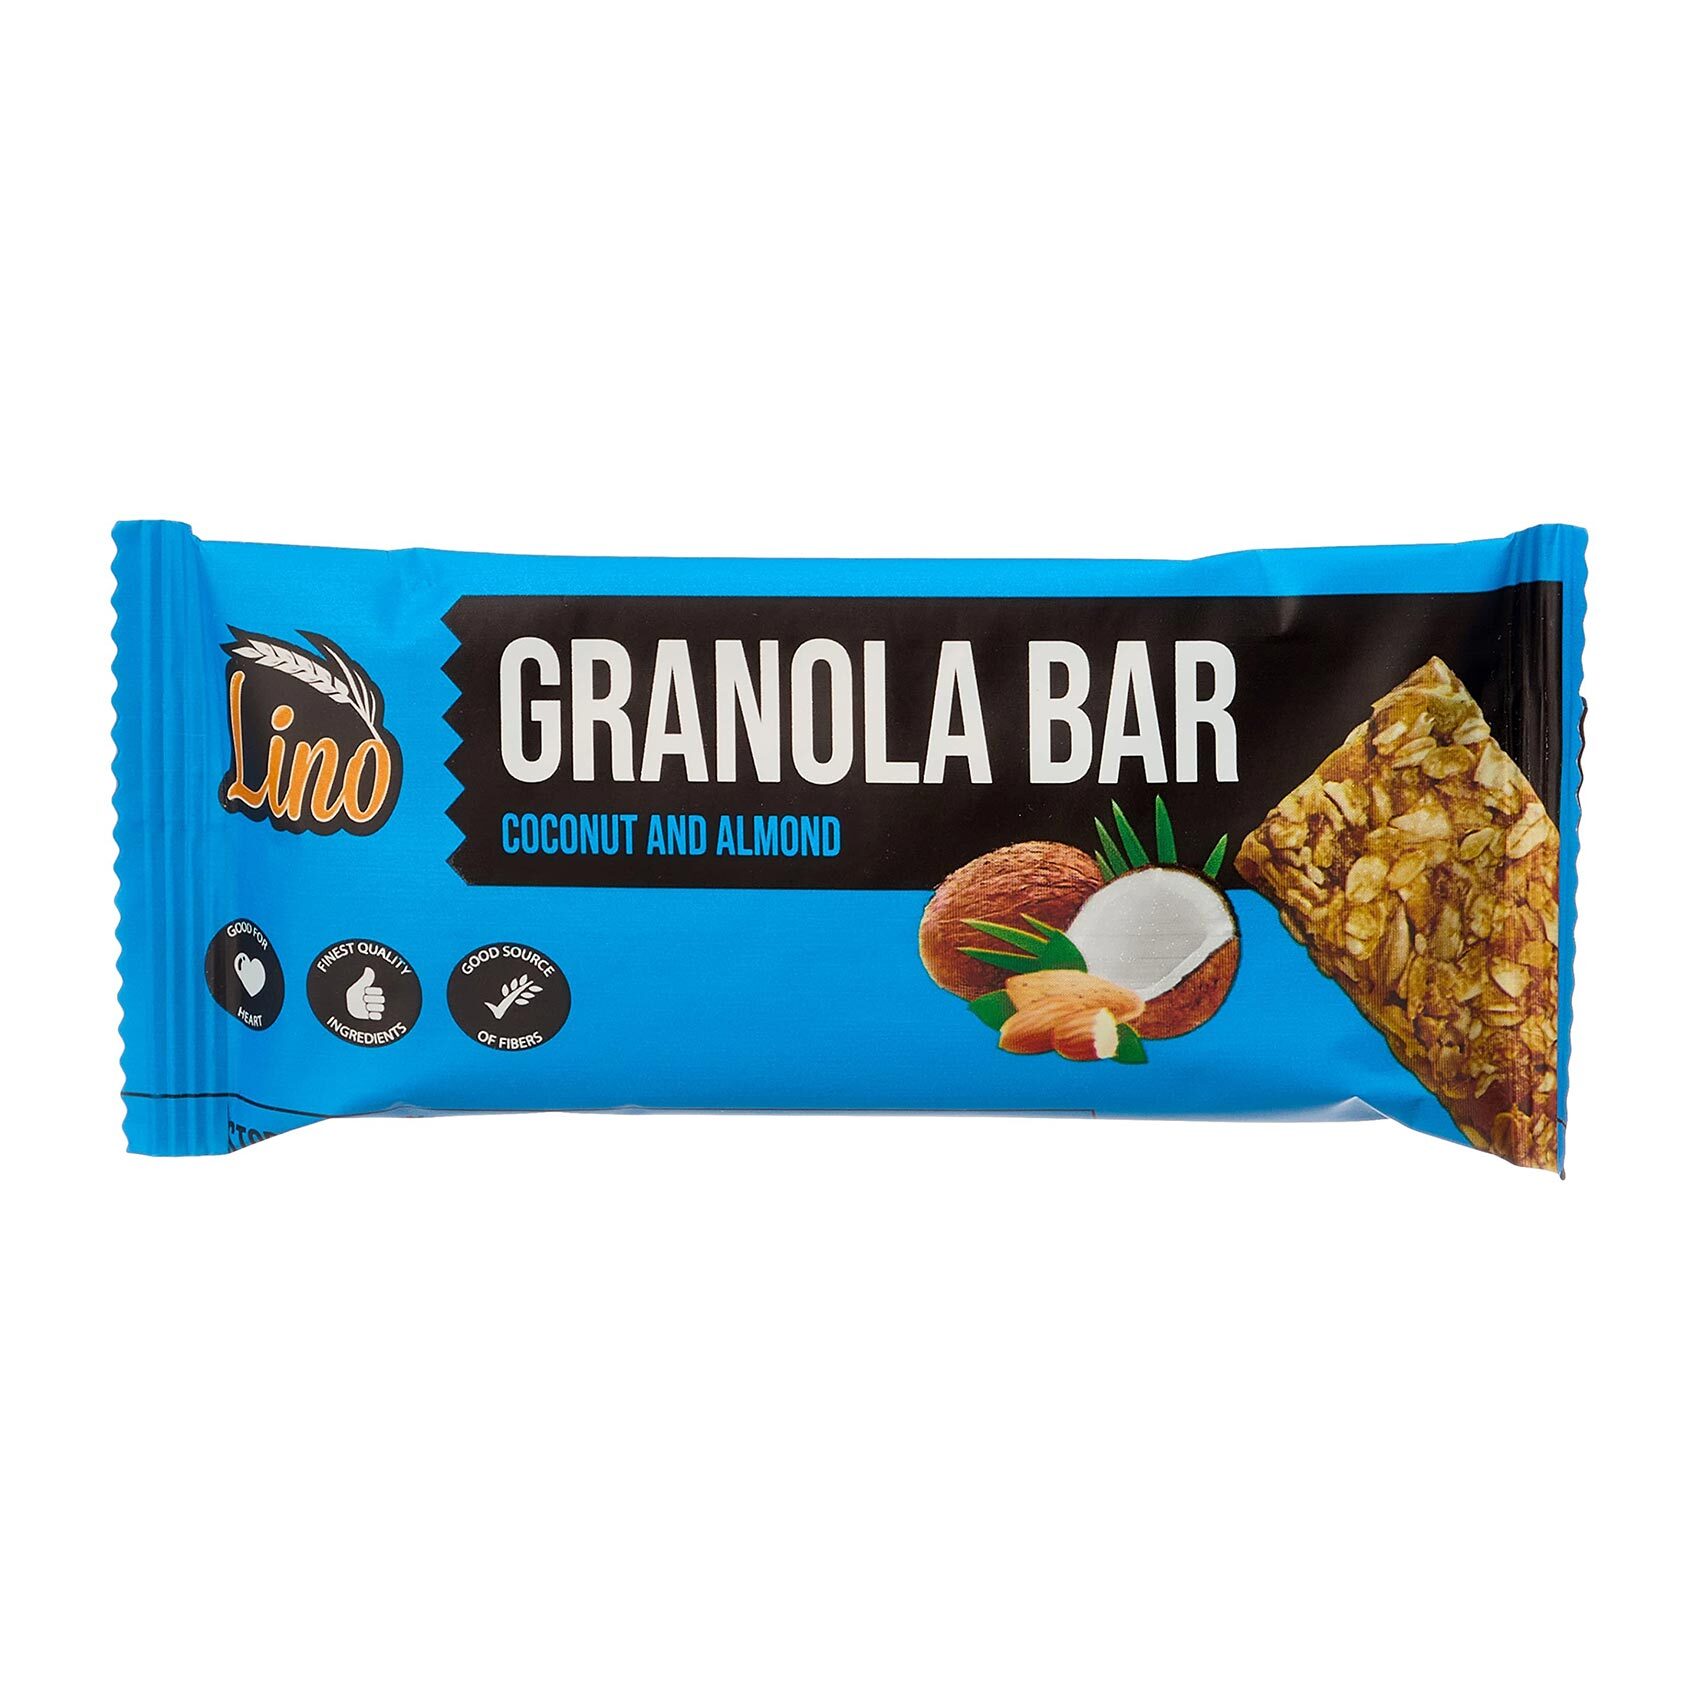 Buy Lino Granola Bar with Coconut and Almond - 4 Pieces Online - Shop Food  Cupboard on Carrefour Egypt